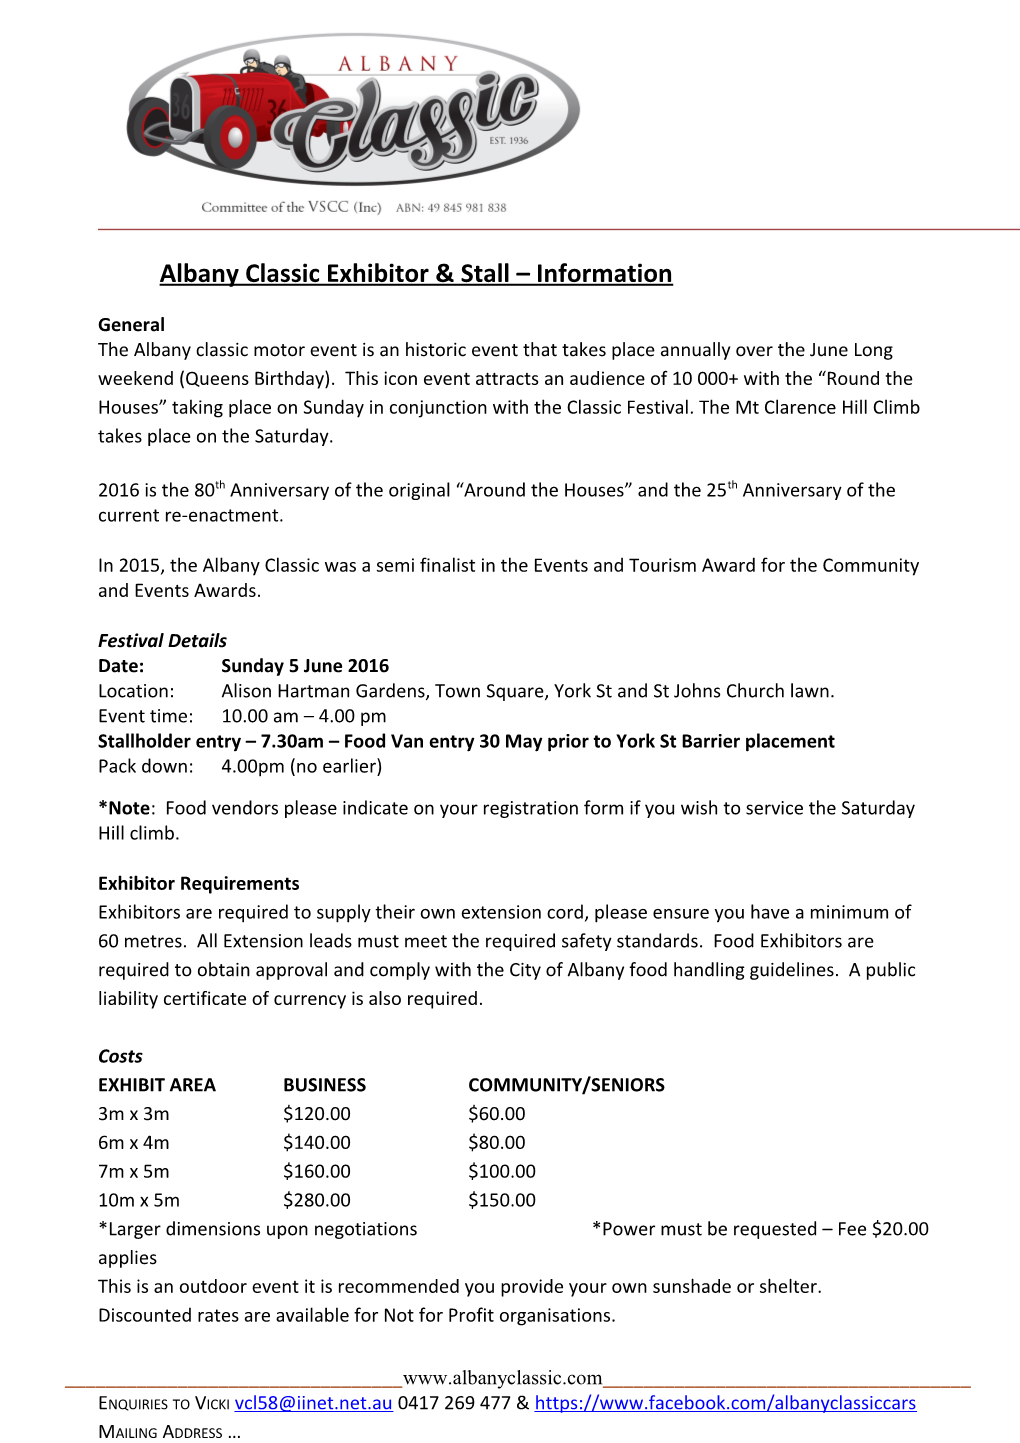 Albany Classic Exhibitor & Stall Holder